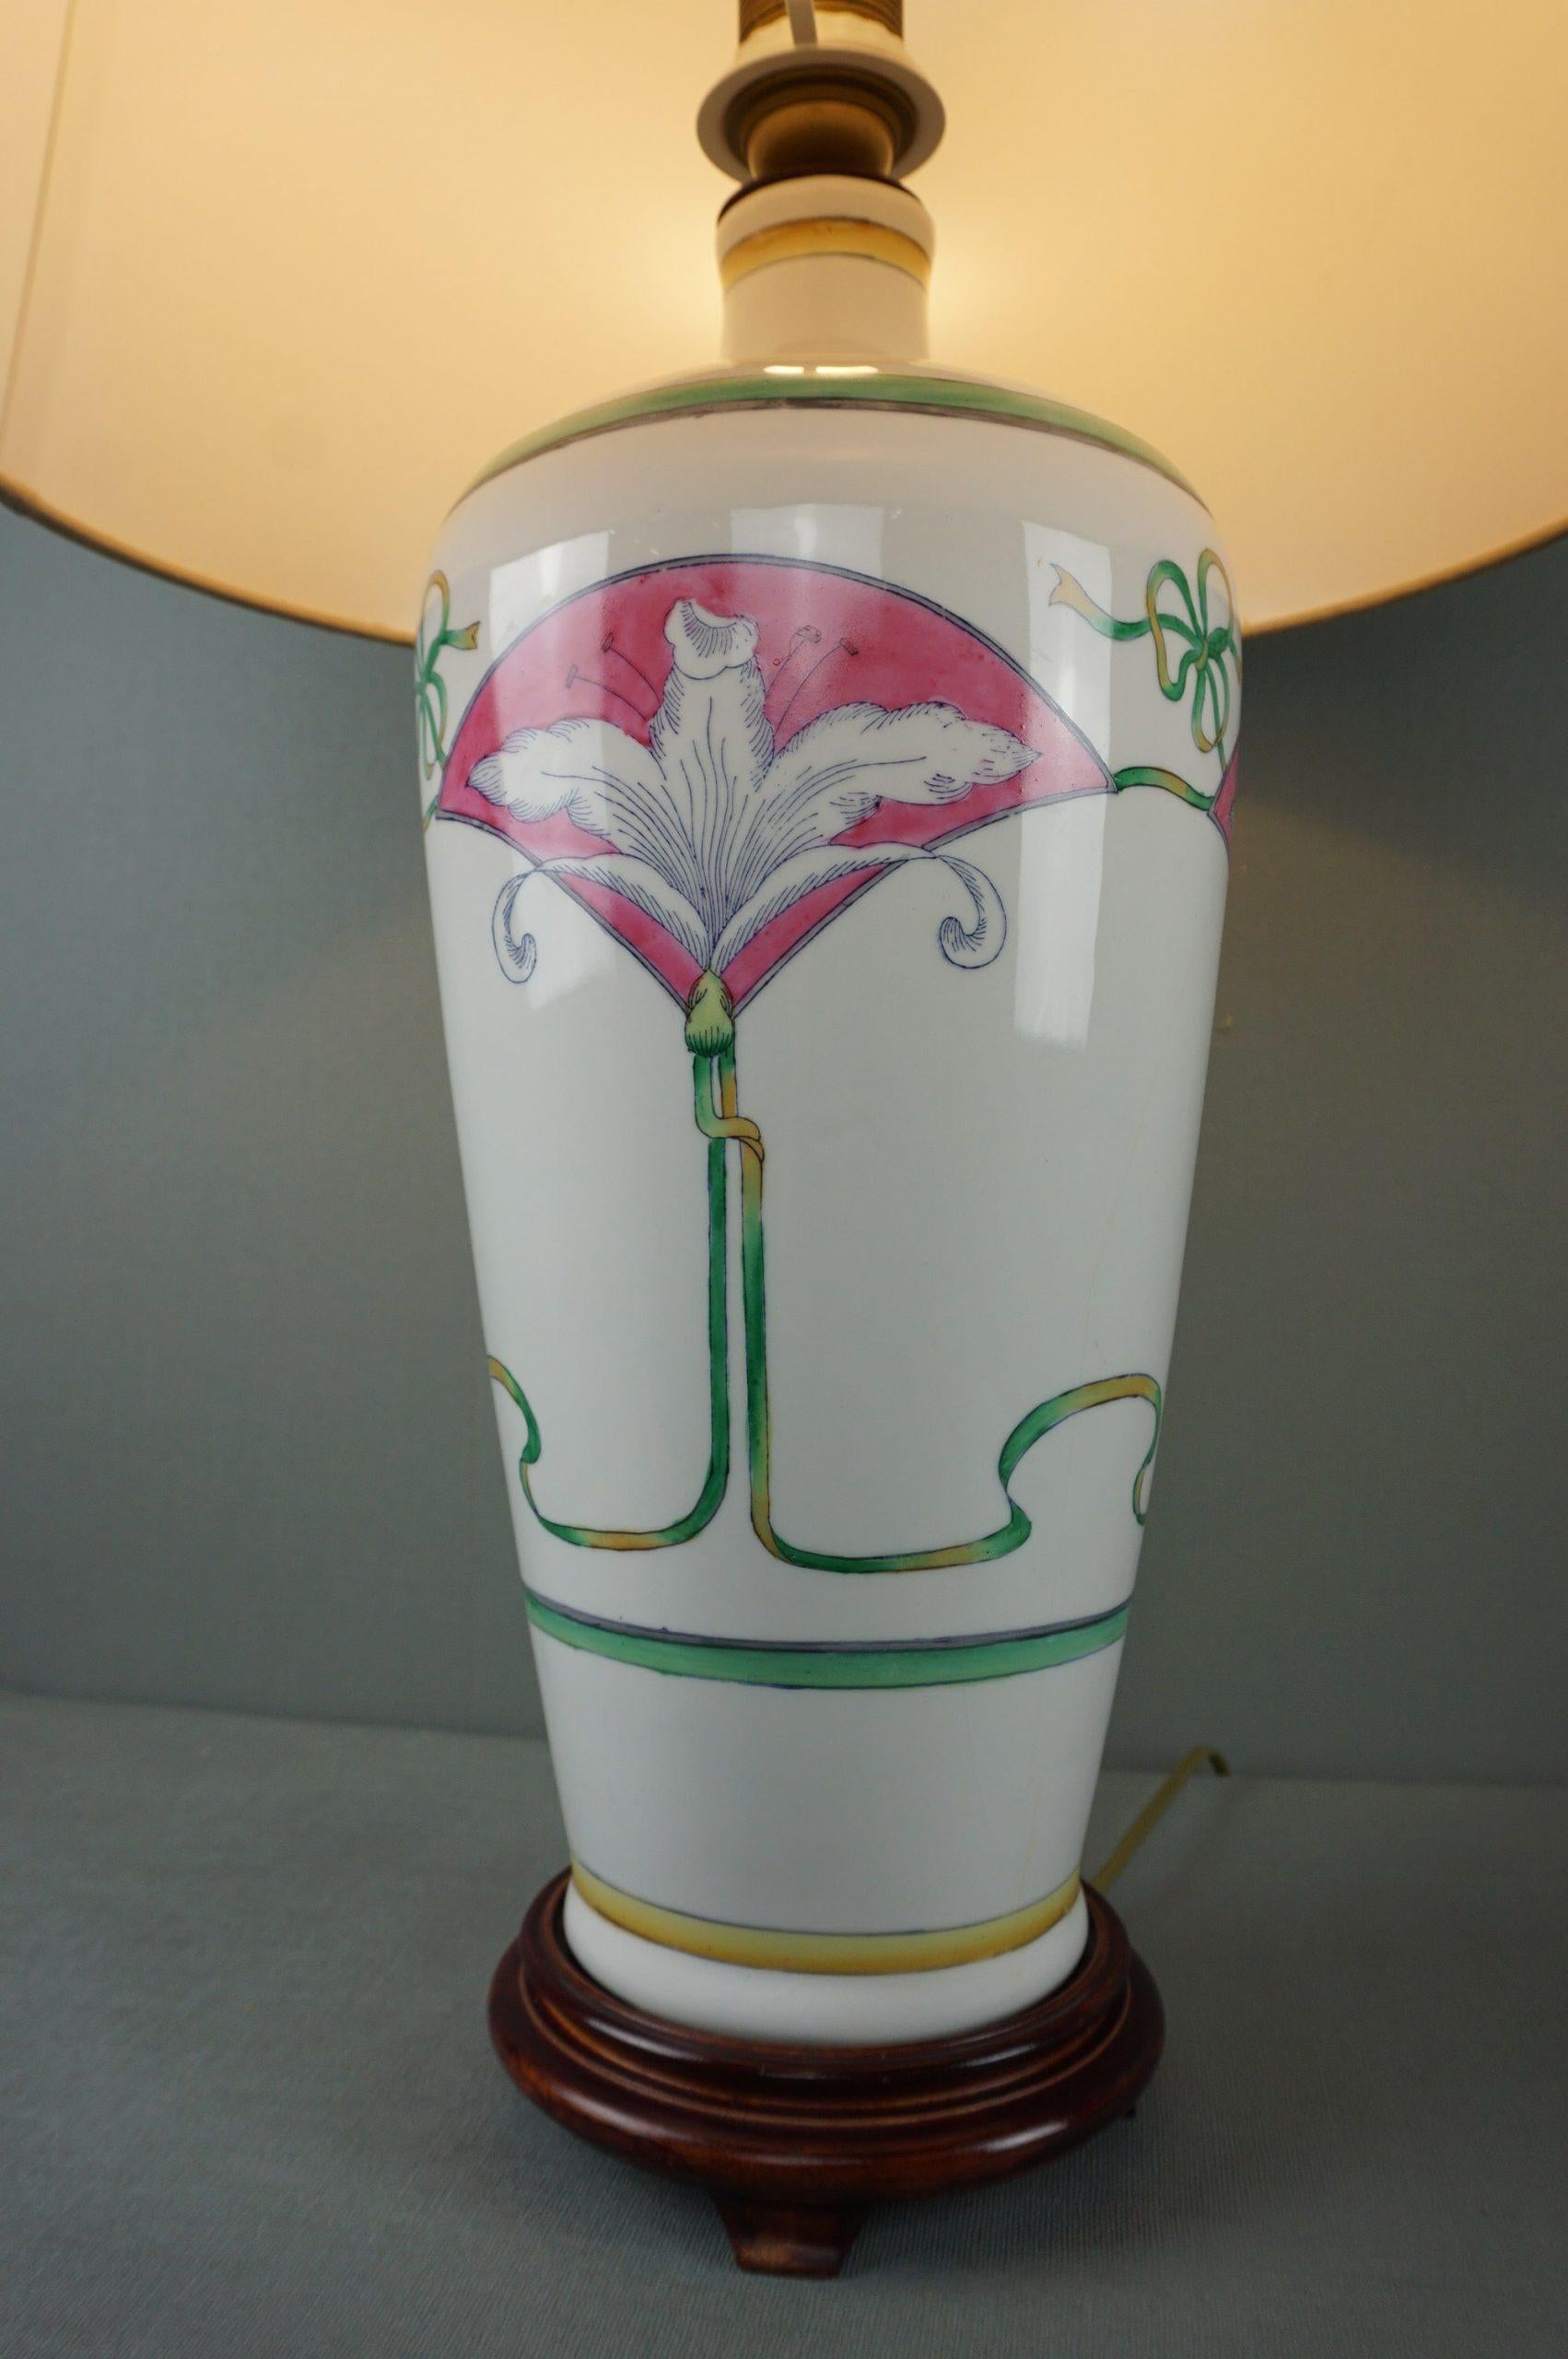 This beautiful painted table lamp has beautiful flower and leaf motifs.

This lamp with a lily pattern is a very attractive table lamp in a classic design. The combination of the white ceramic, the fabric shade and the wooden base make this lamp